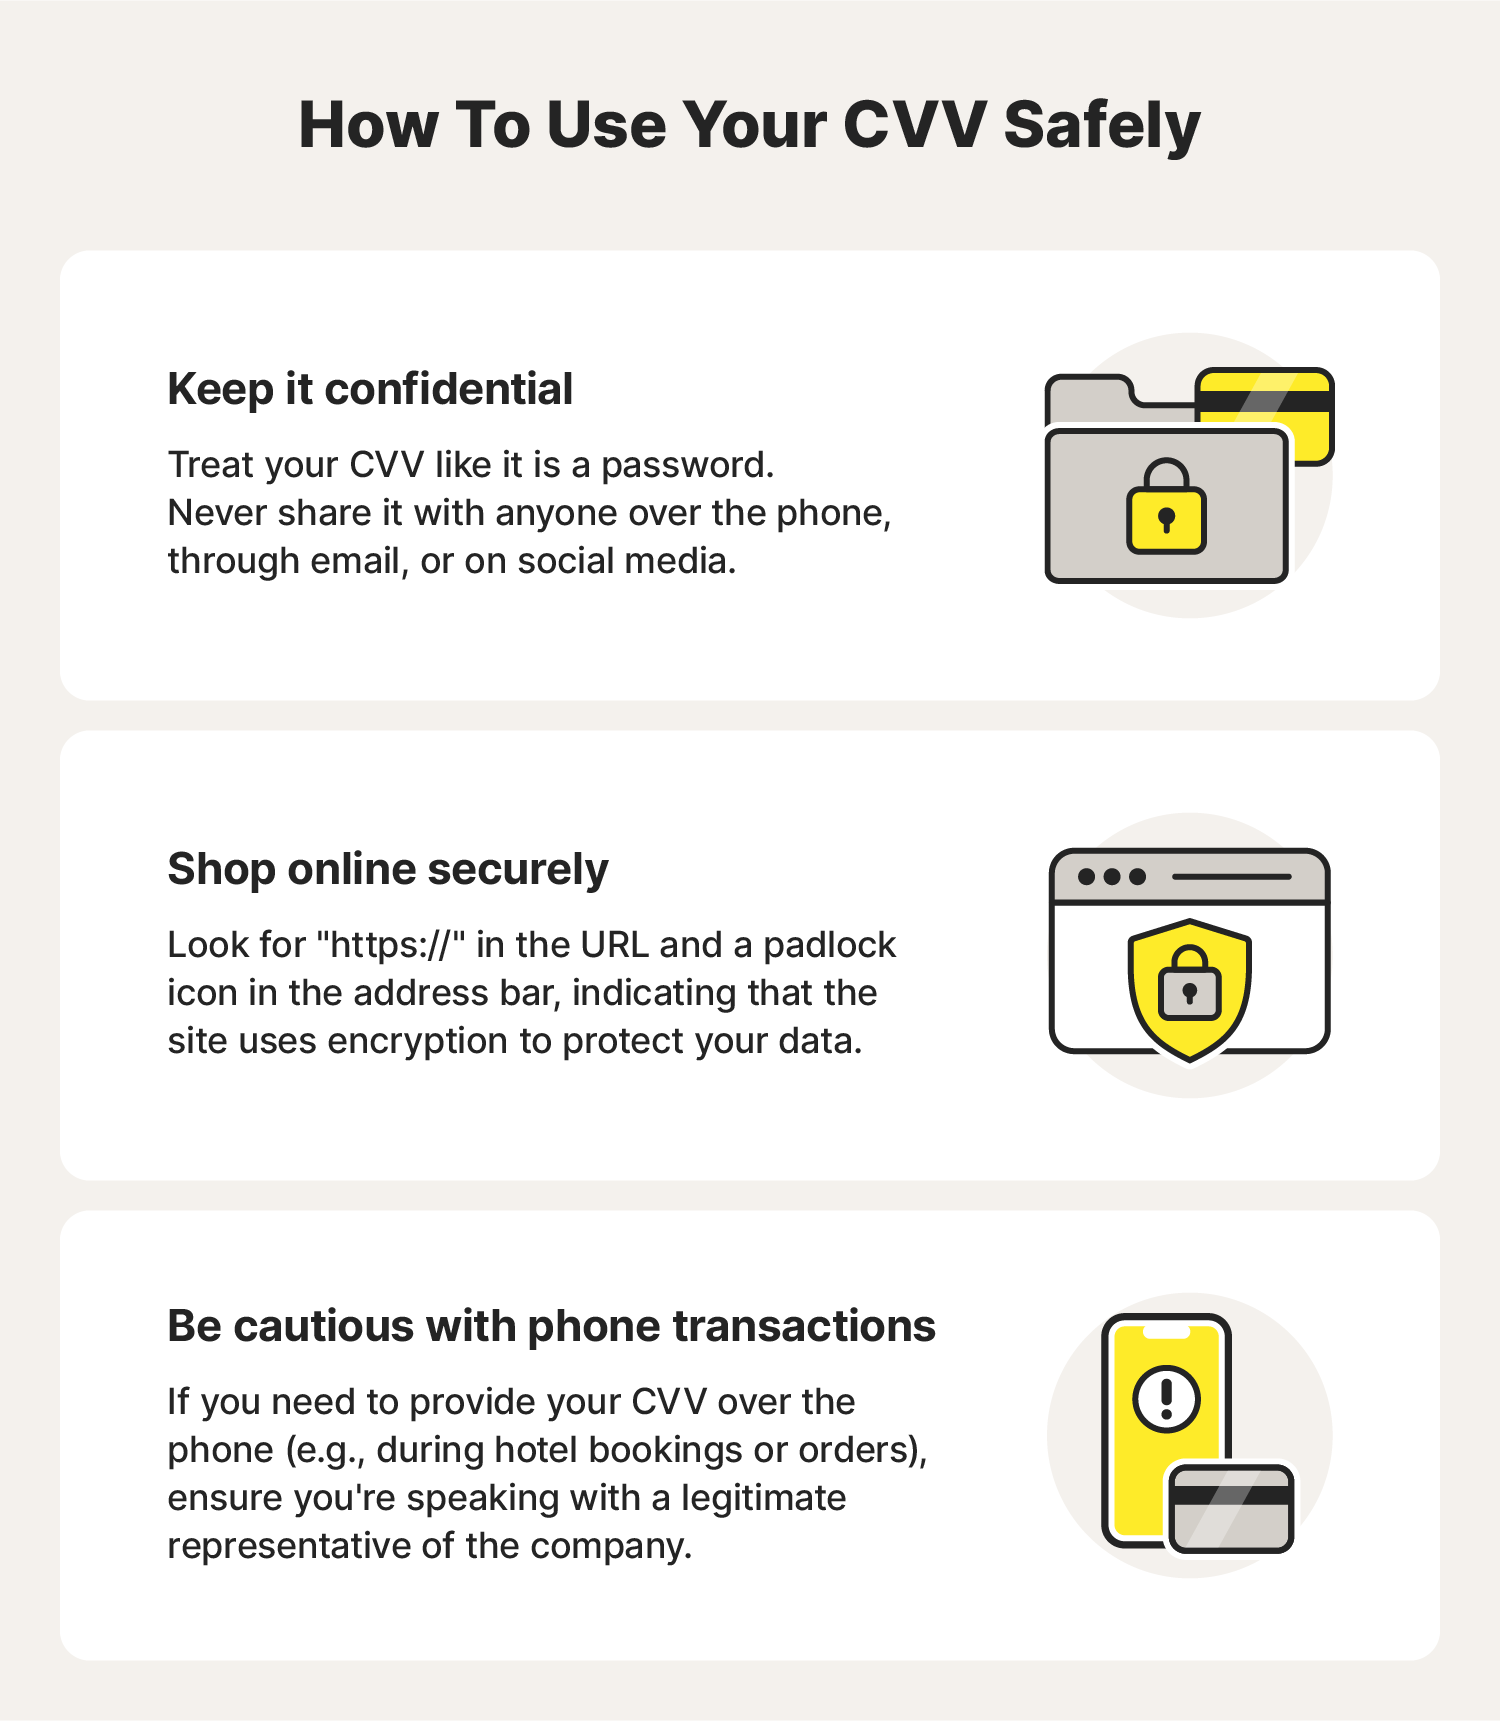 Three illustrations accompany tips for how to use your CVV safely.